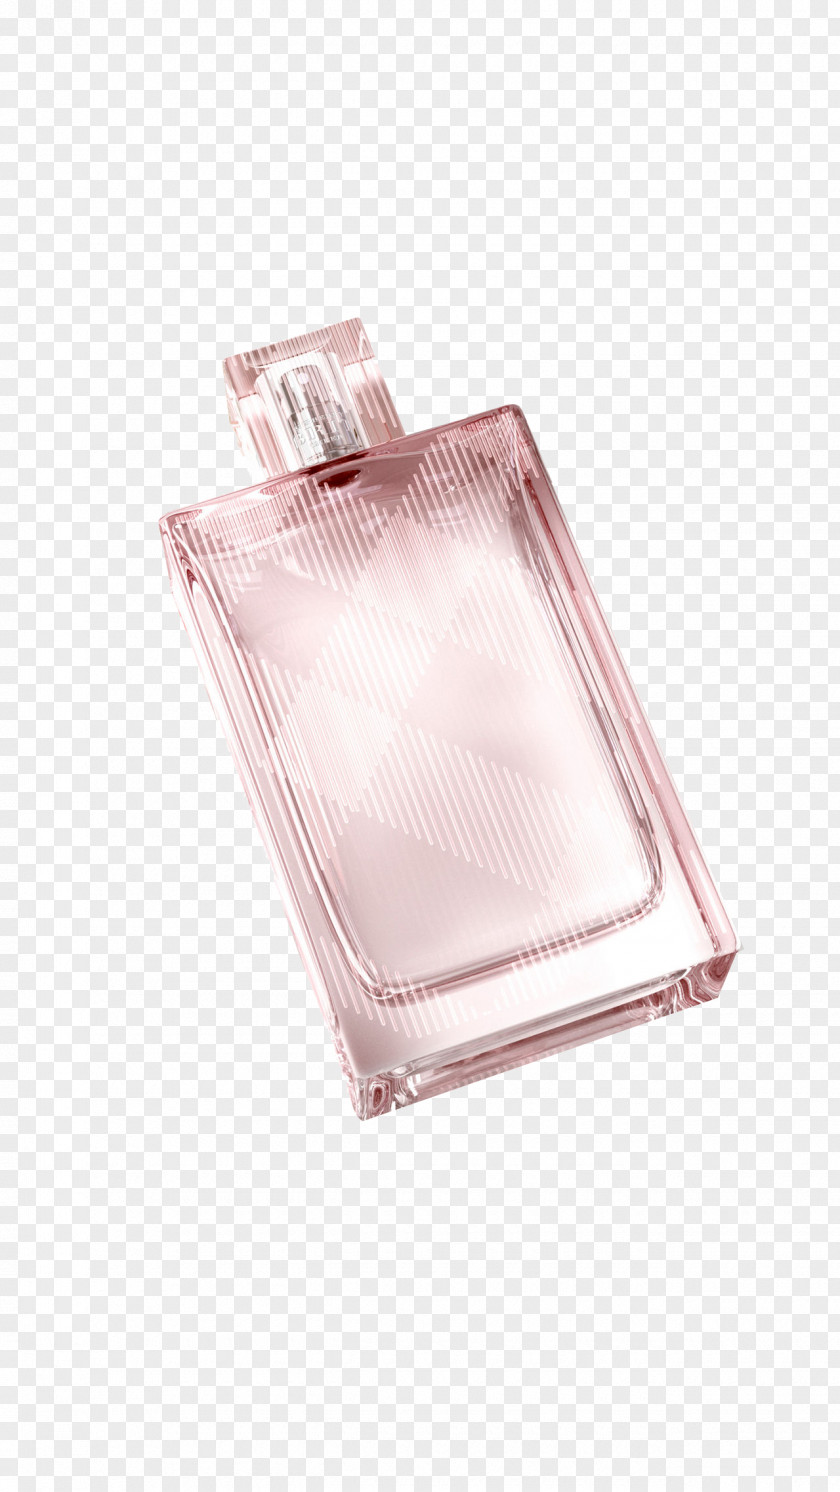 Burberry Style Rock Eau Ms. Maximo Oliveros Chanel Coco Mademoiselle Perfume De Toilette PNG